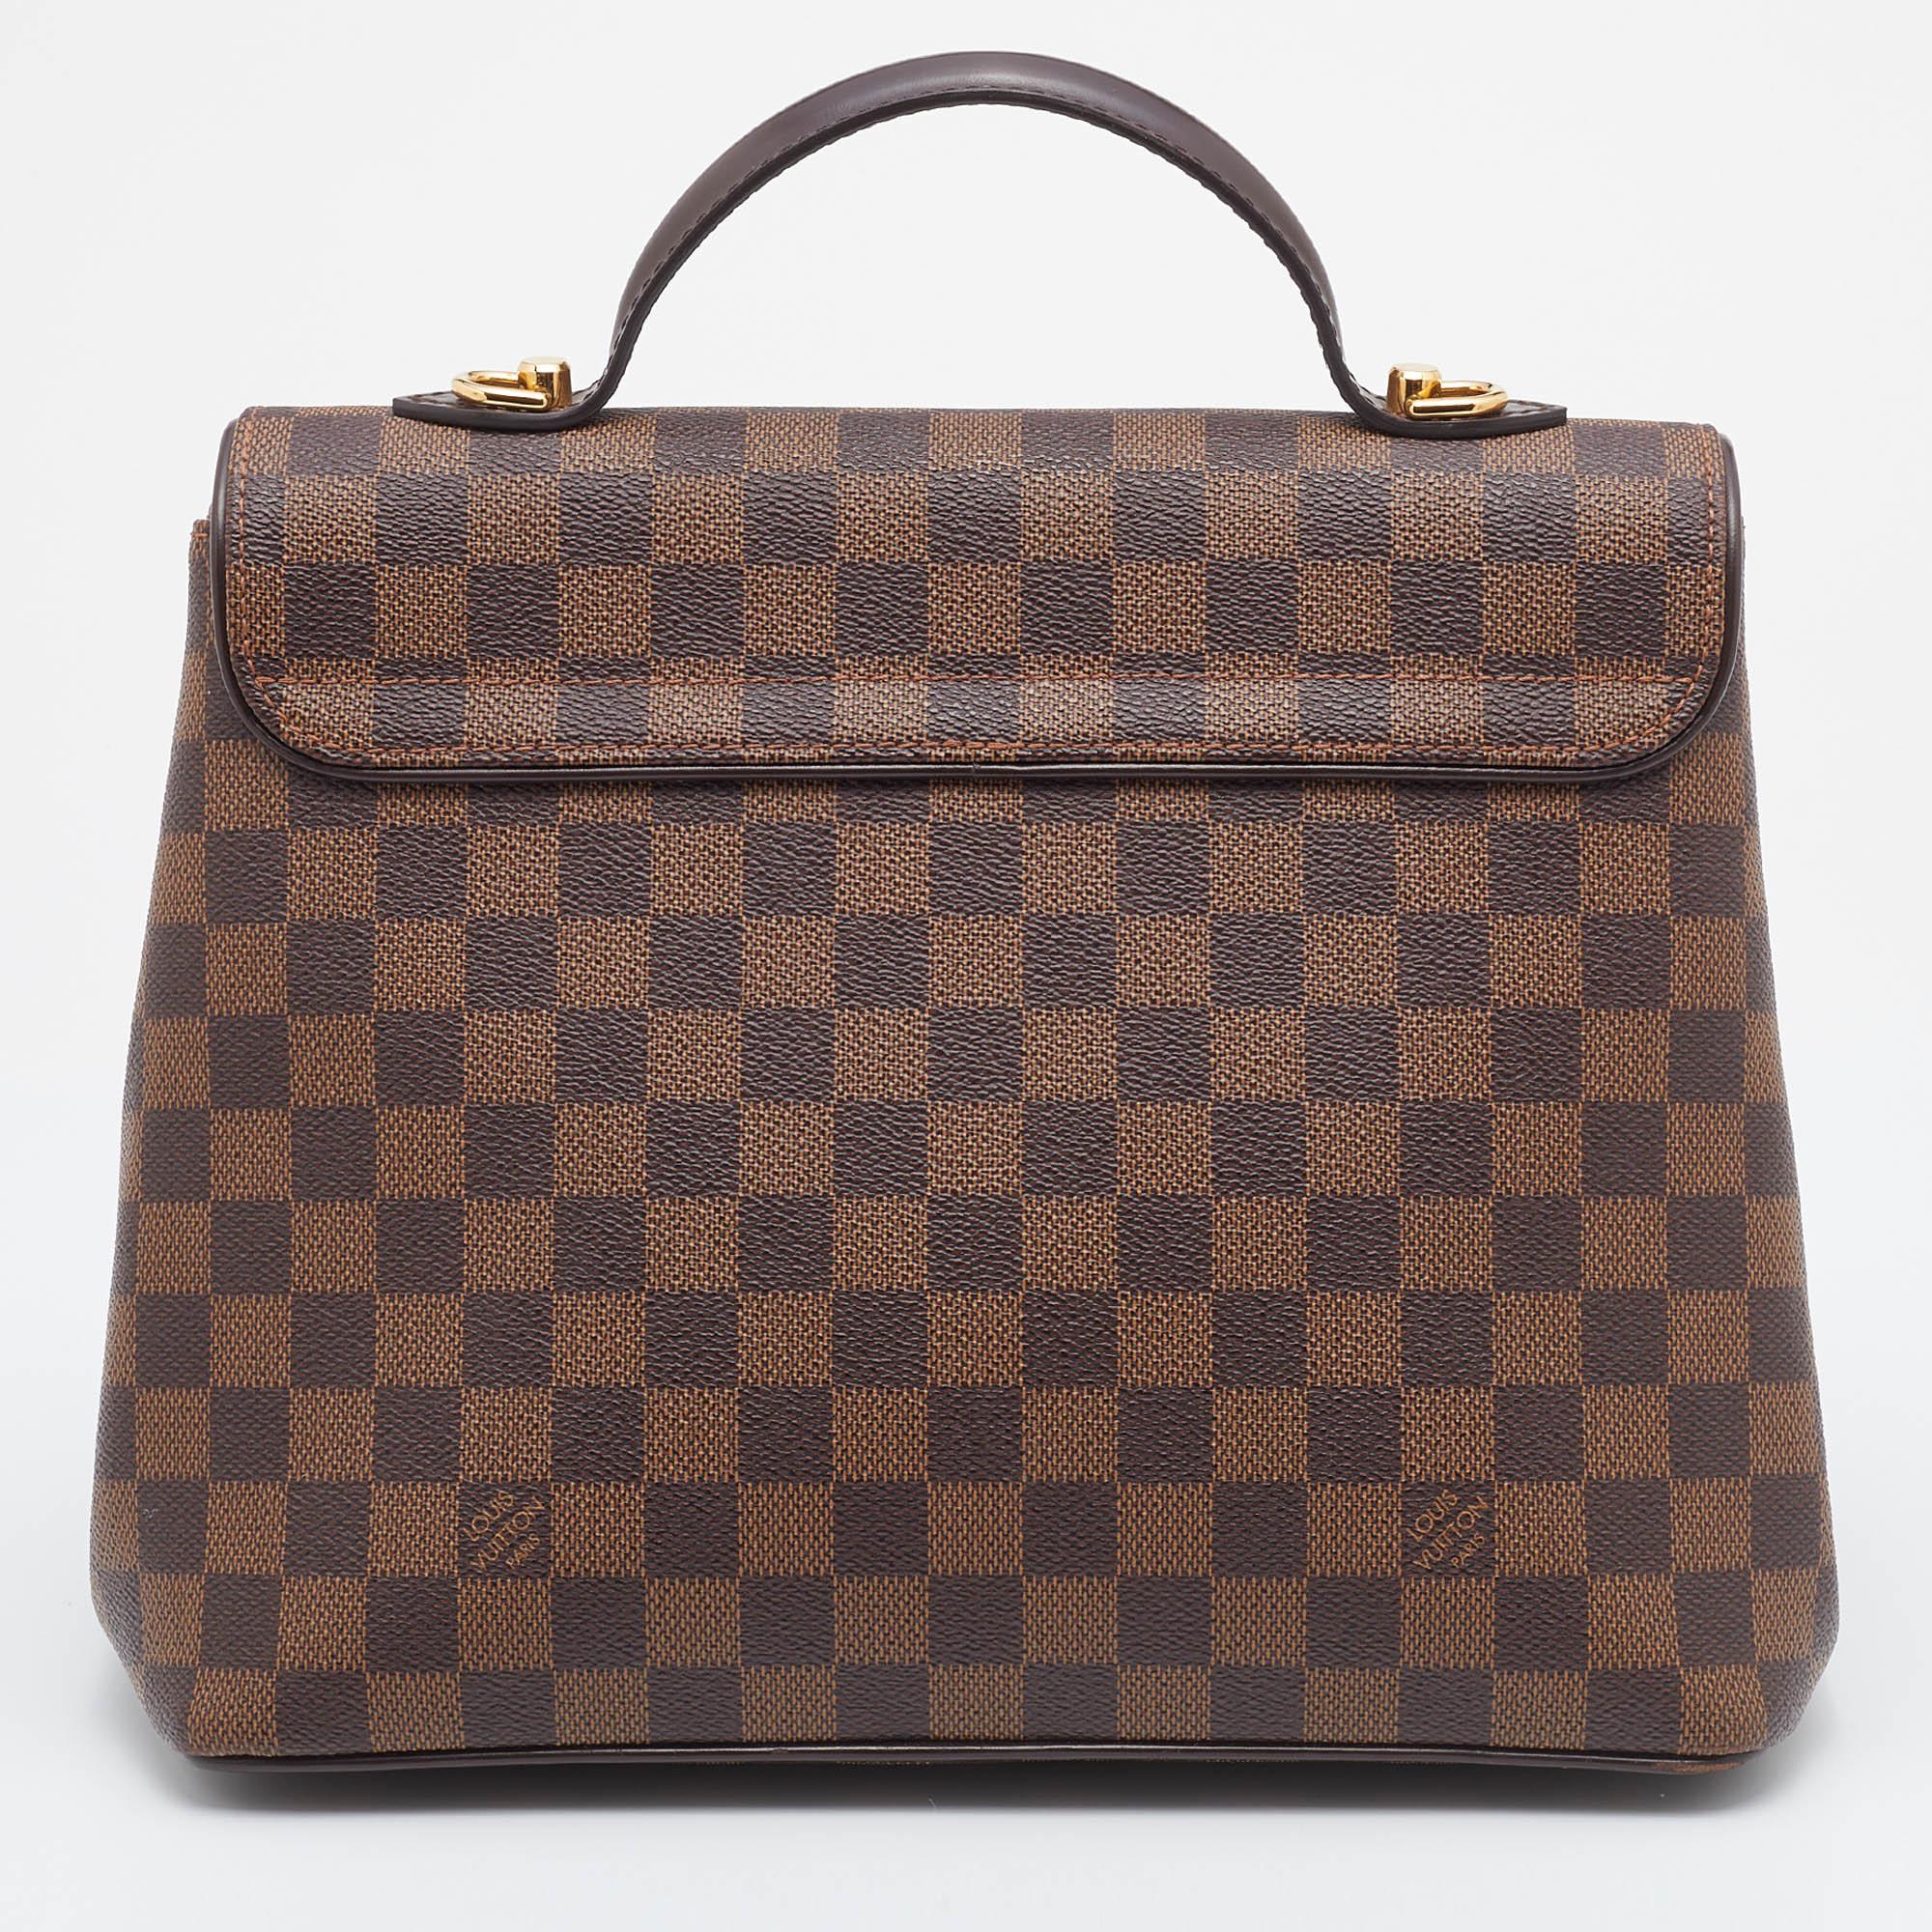 Louis Vuitton's Bergamo bag meets the expectations of an investment-worthy bag. This creation has been beautifully crafted from signature Damier Ebene canvas & leather and styled with a front flap that has a twist lock. The insides are lined with